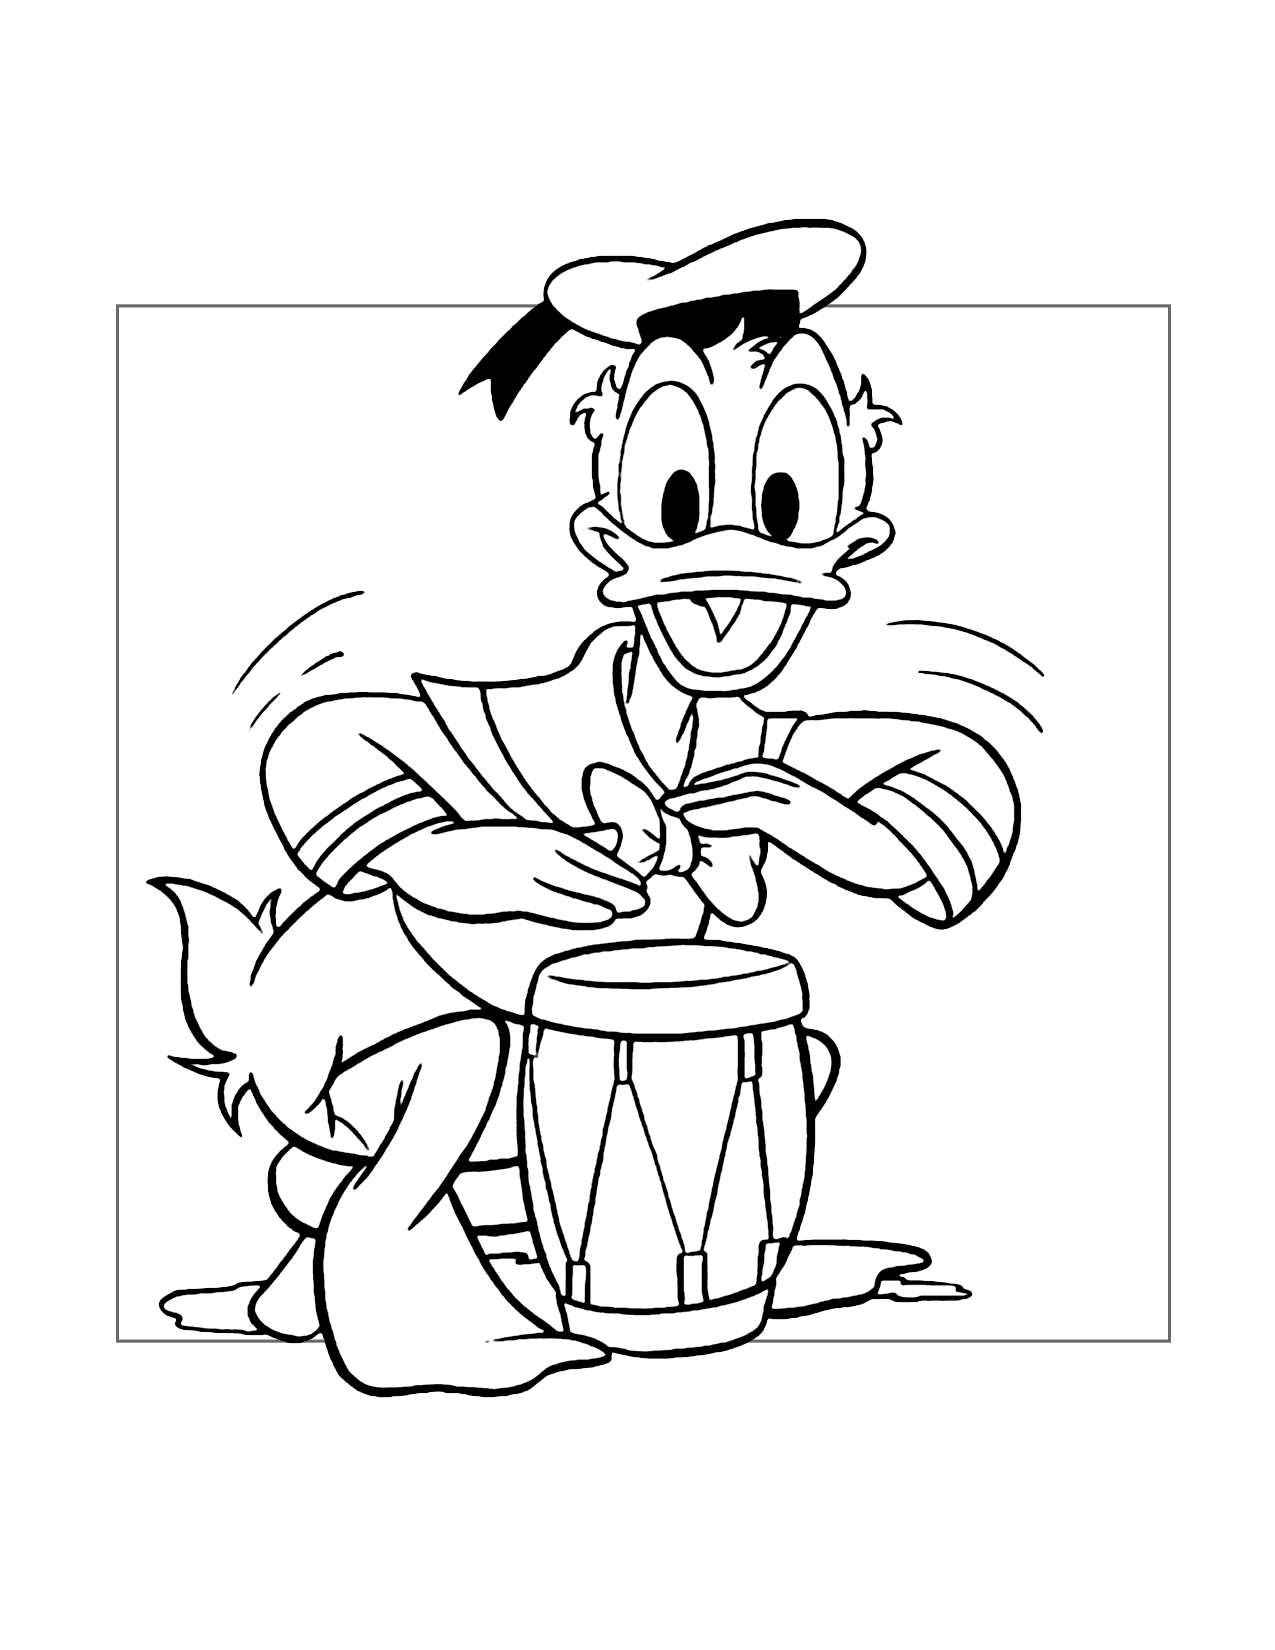 Donald Duck Drummer Coloring Page